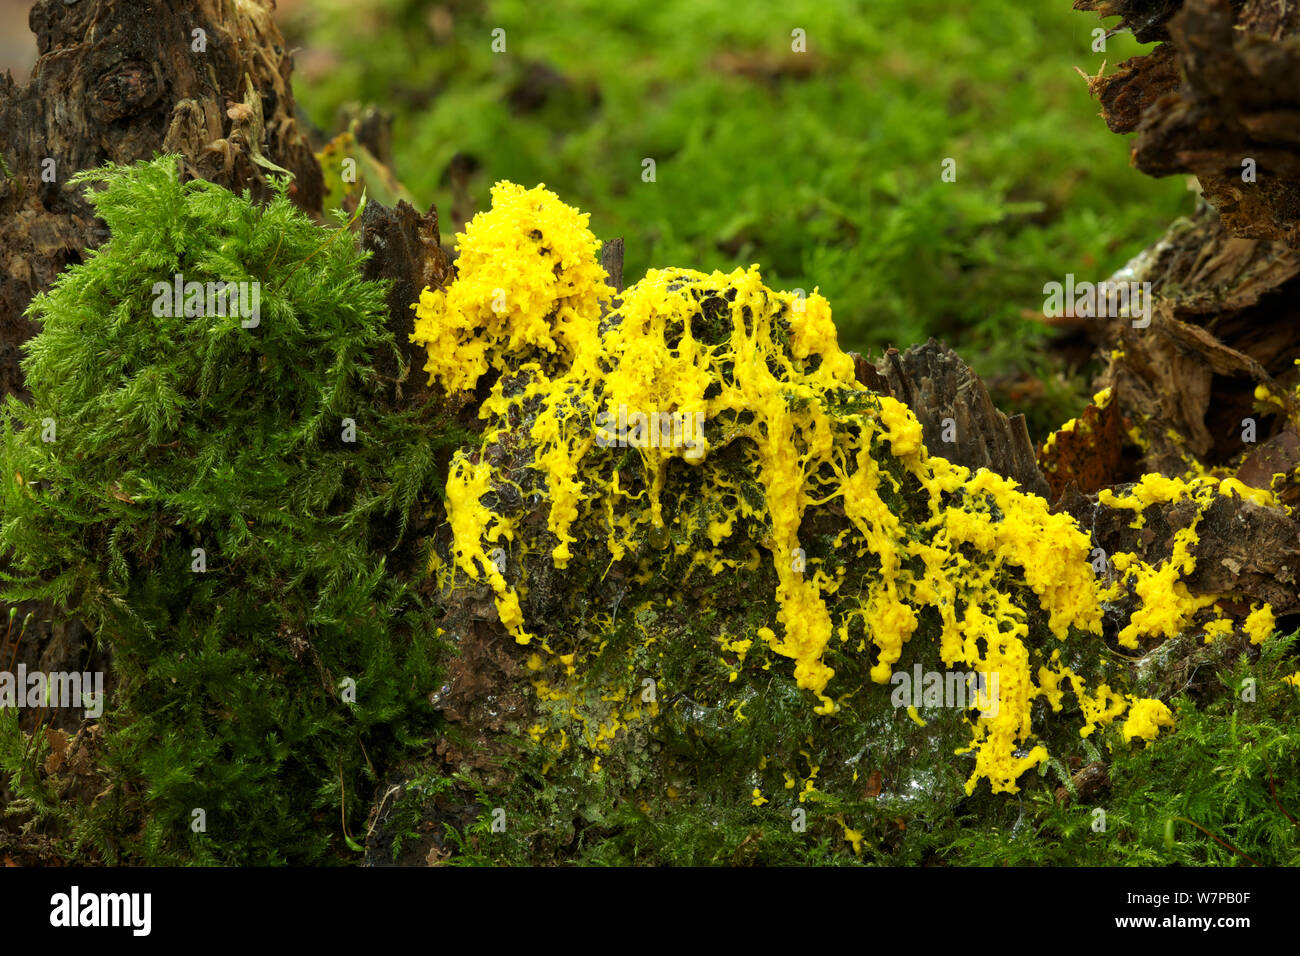 Slime mould (Fugio septica) growing on decaying birch stump, Annafarriff Wood NNR, Peatlands, County Armagh, Northern Ireland, June Stock Photo